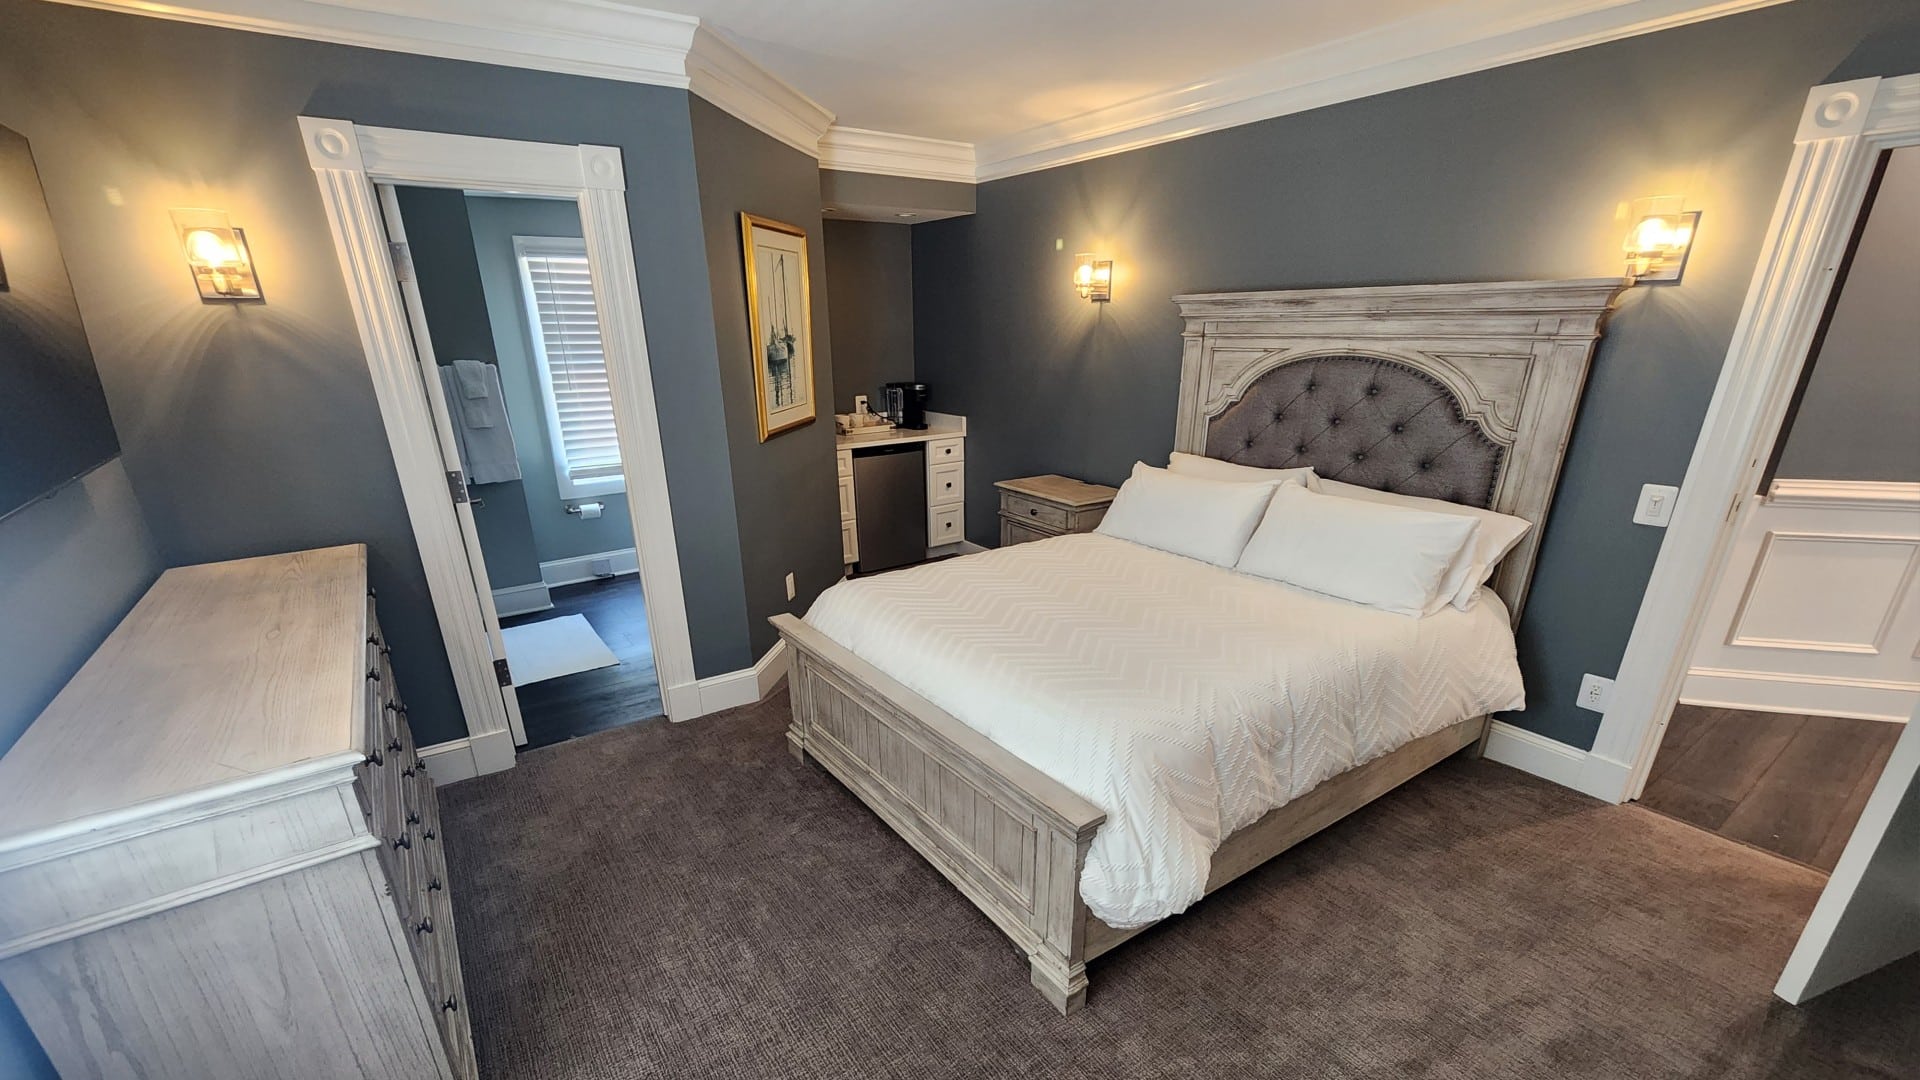 Elegant bedroom in hues of grey with king bed, small kitchenette counter, dresser and doorway into a bathroom